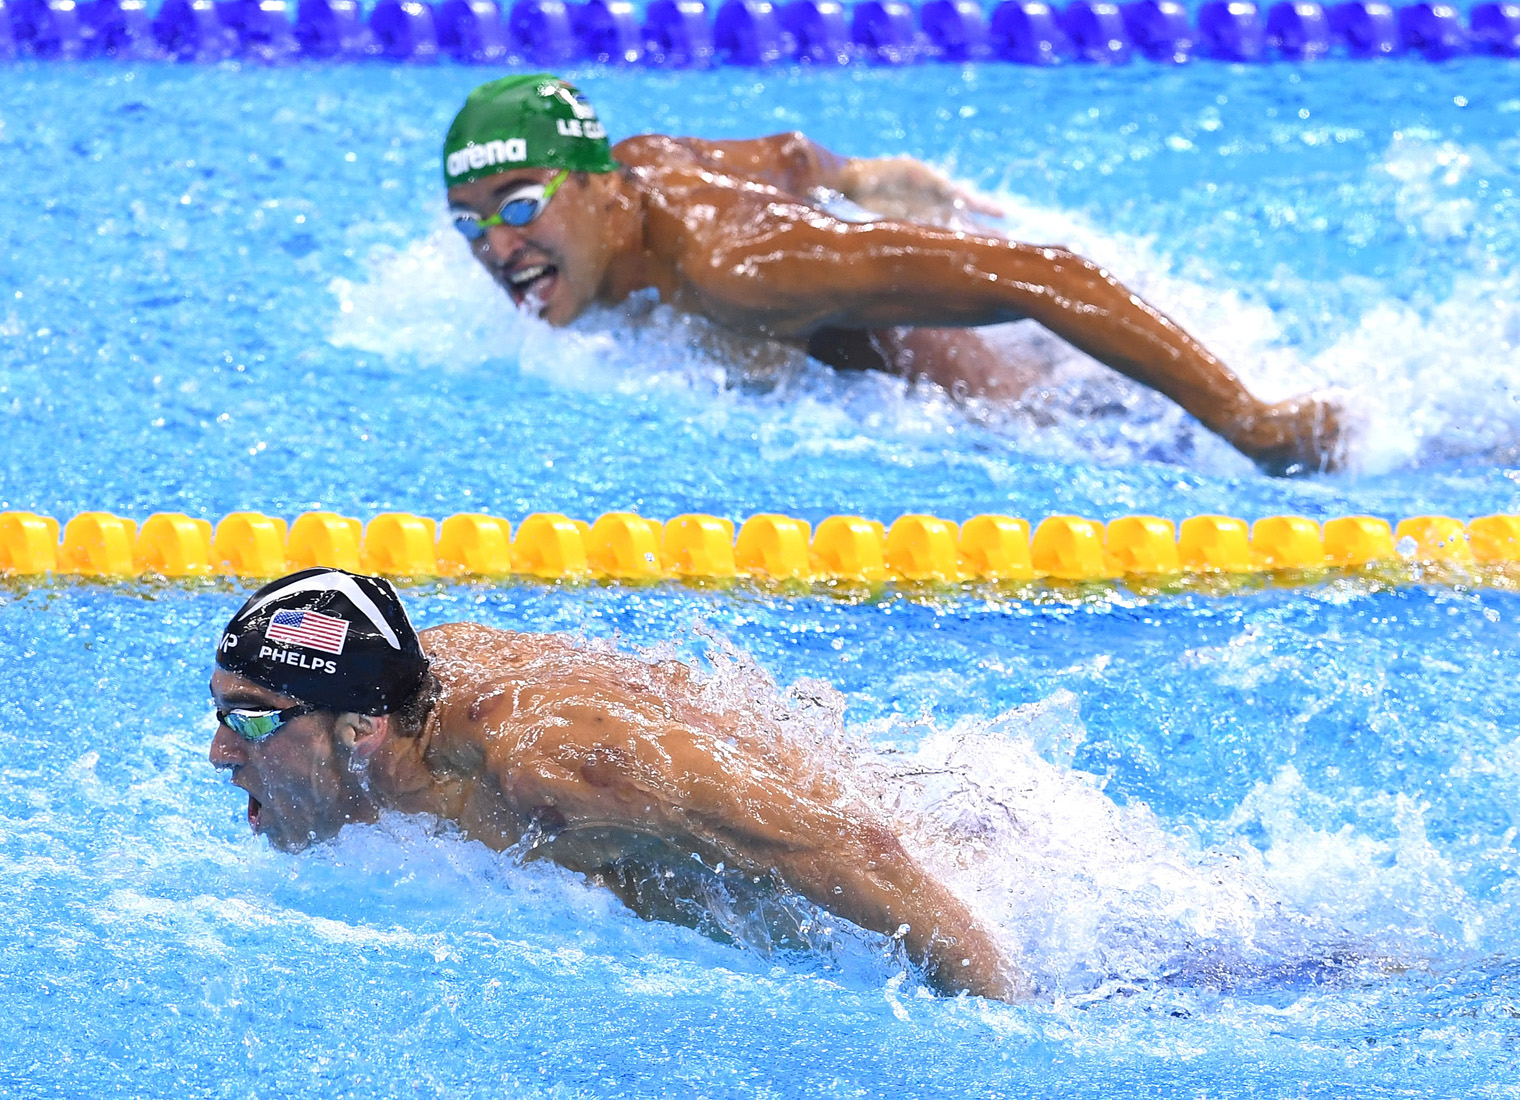 RIO DE JANEIRO, BRAZIL - AUGUST 09: Michael Phelps (L) of the United States leads Chad le Clos of South Africa in the Men's 200m Butterfly Final on Day 4 of the Rio 2016 Olympic Games at the Olympic Aquatics Stadium on August 9, 2016 in Rio de Janeiro, Brazil. (Photo by David Ramos/Getty Images)